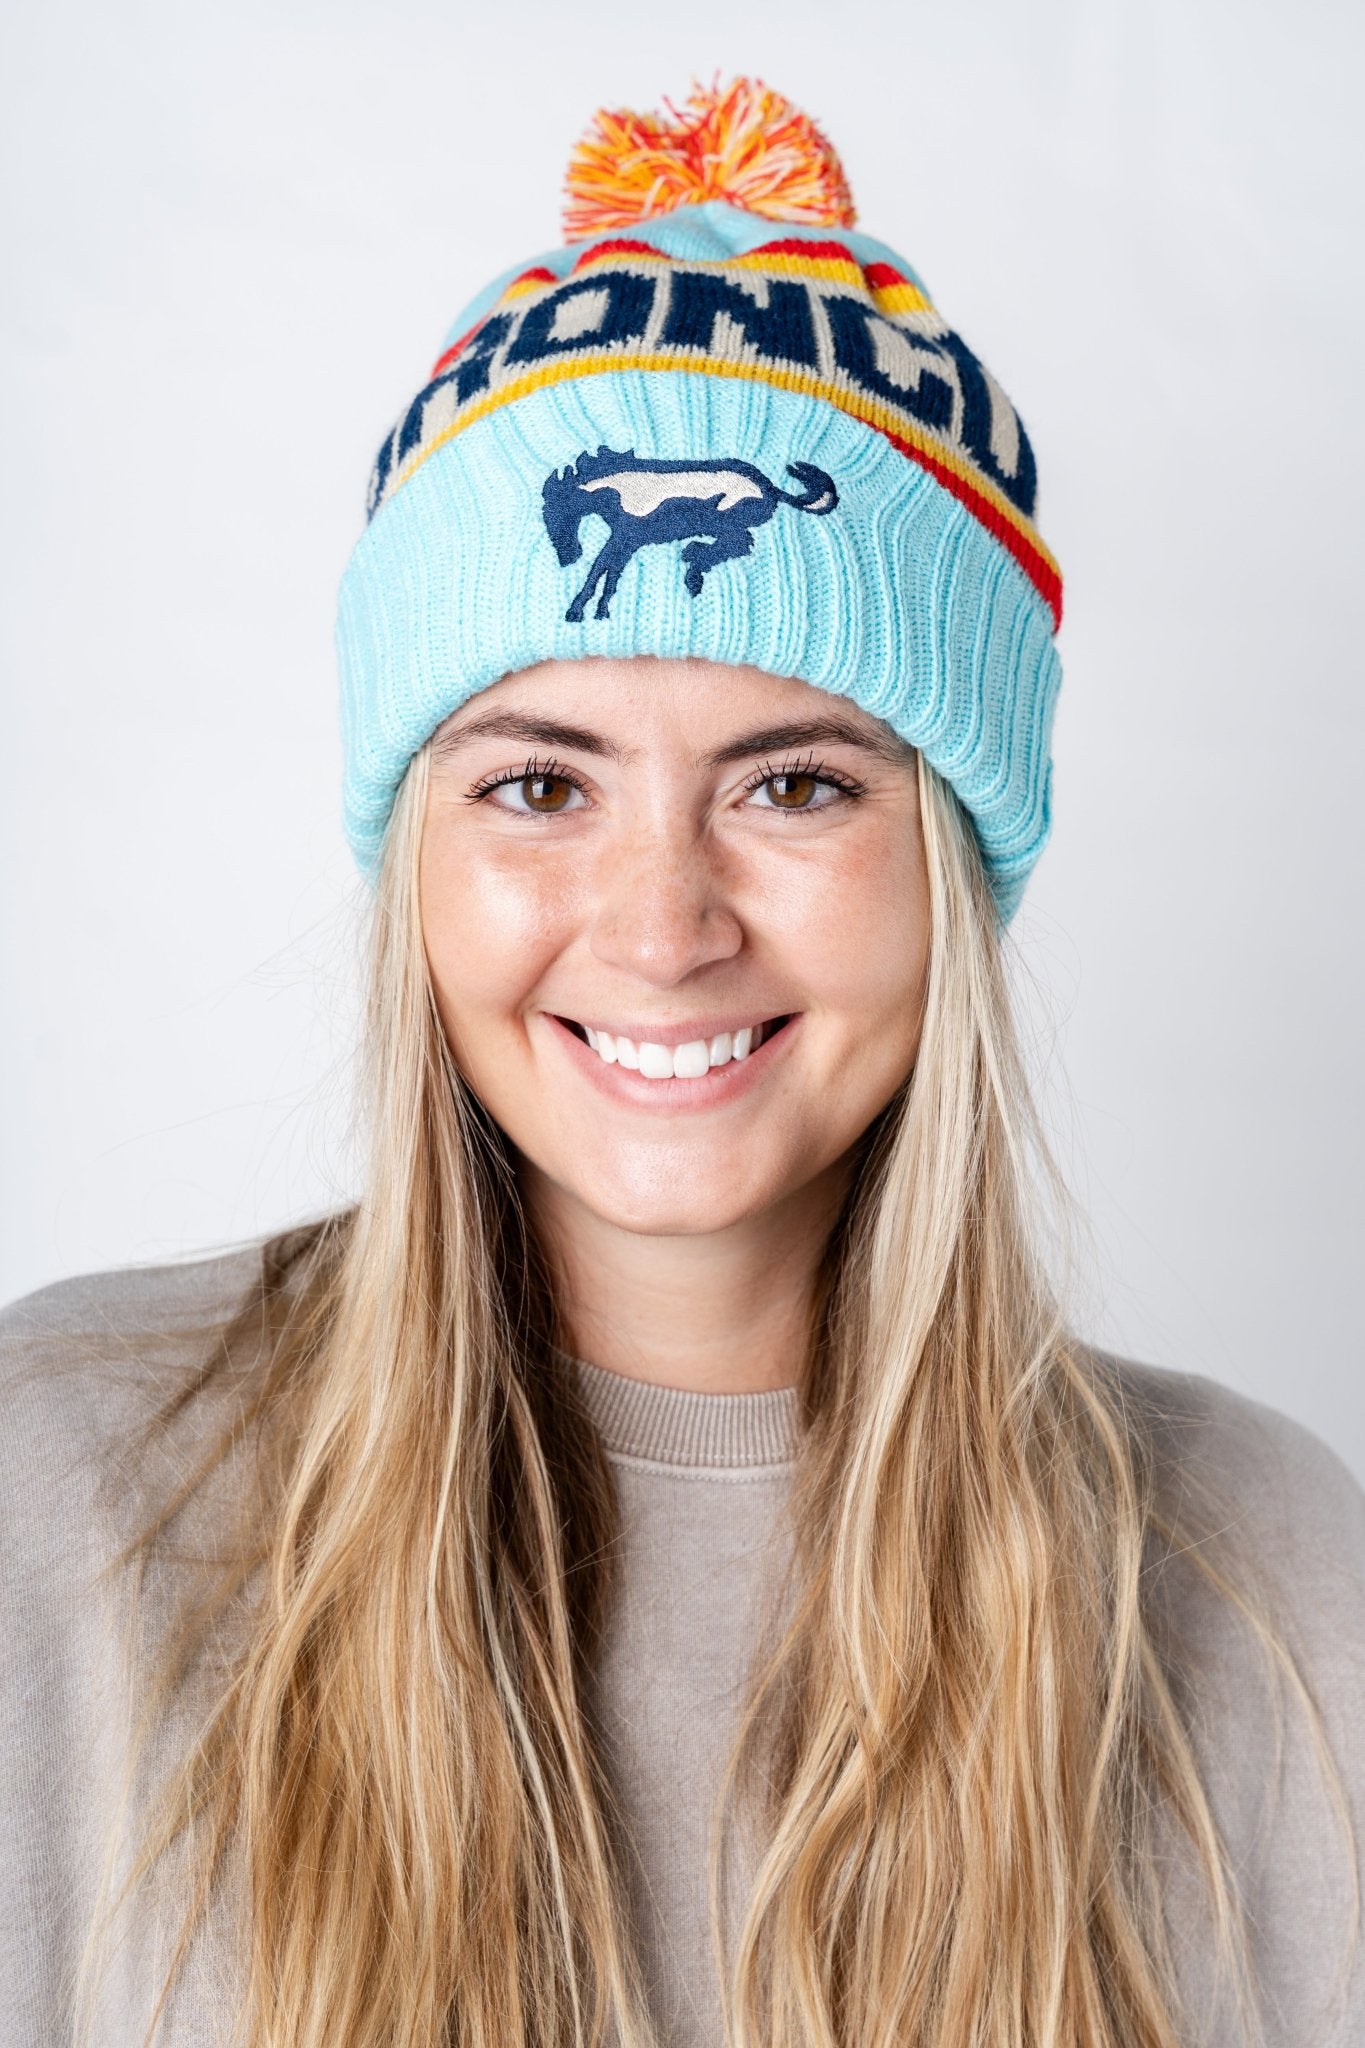 Bronco pillow pom beanie light blue - Trendy Gifts at Lush Fashion Lounge Boutique in Oklahoma City